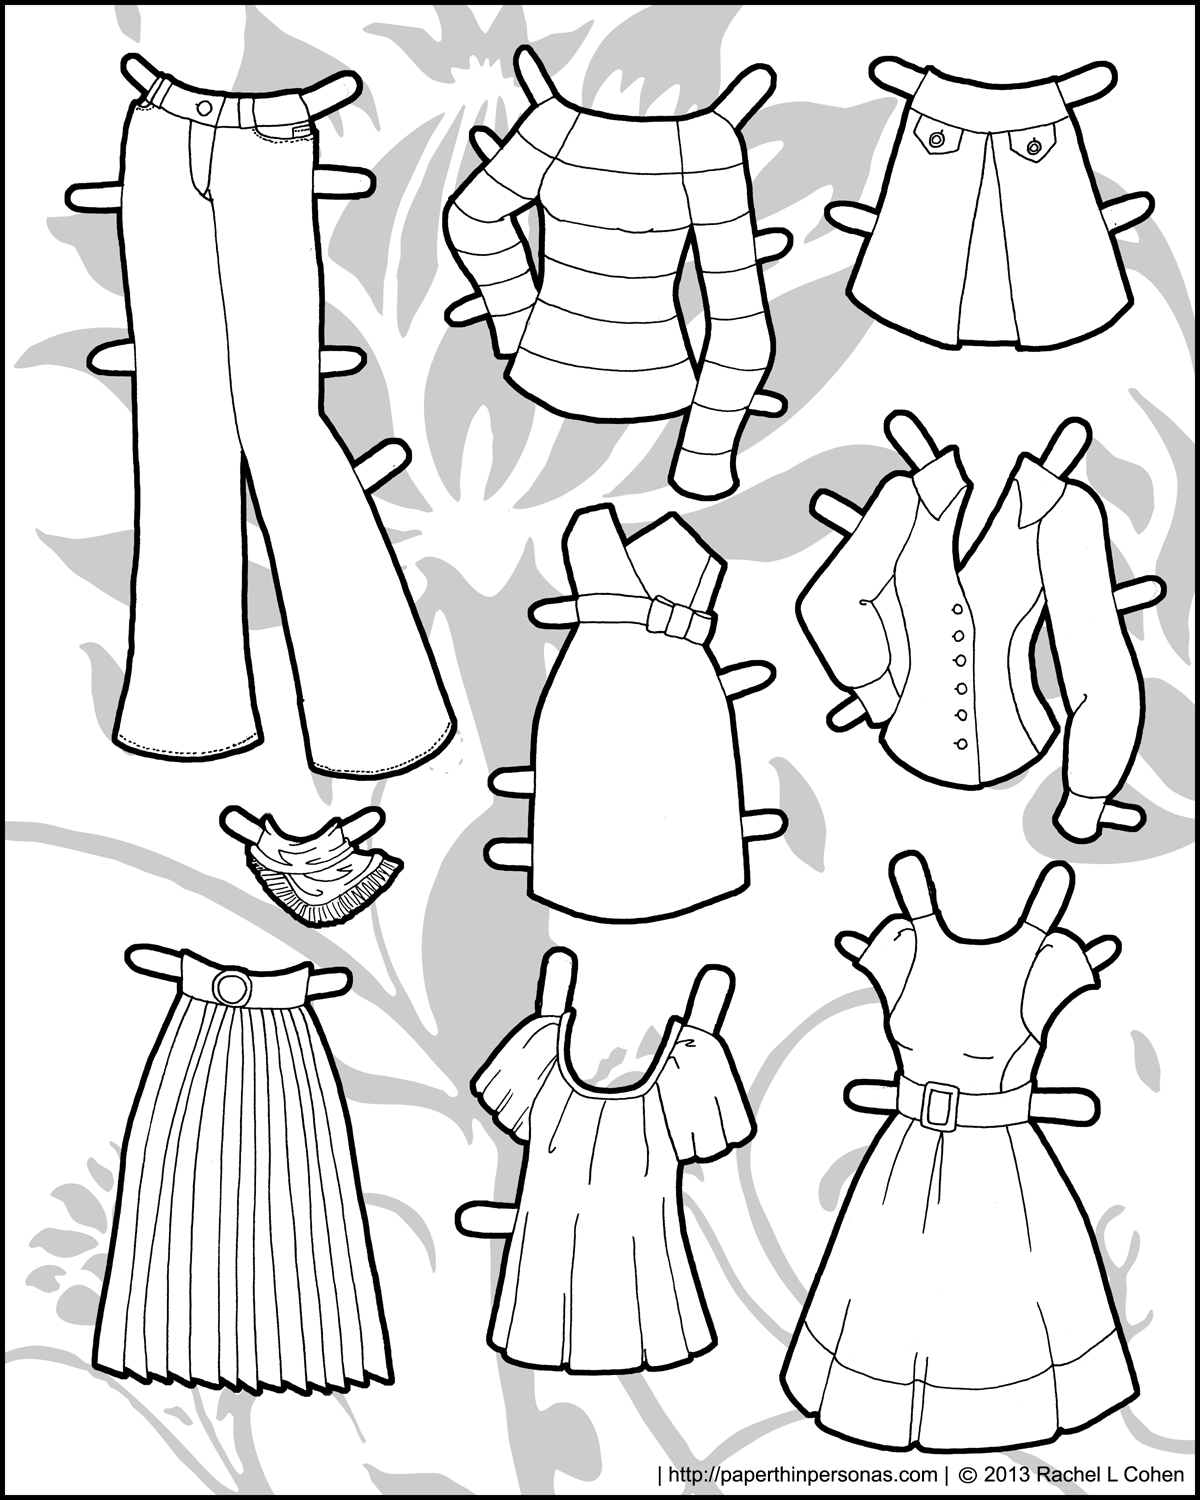 and-yet-more-clothing-for-the-ms-mannequin-printable-paper-dolls